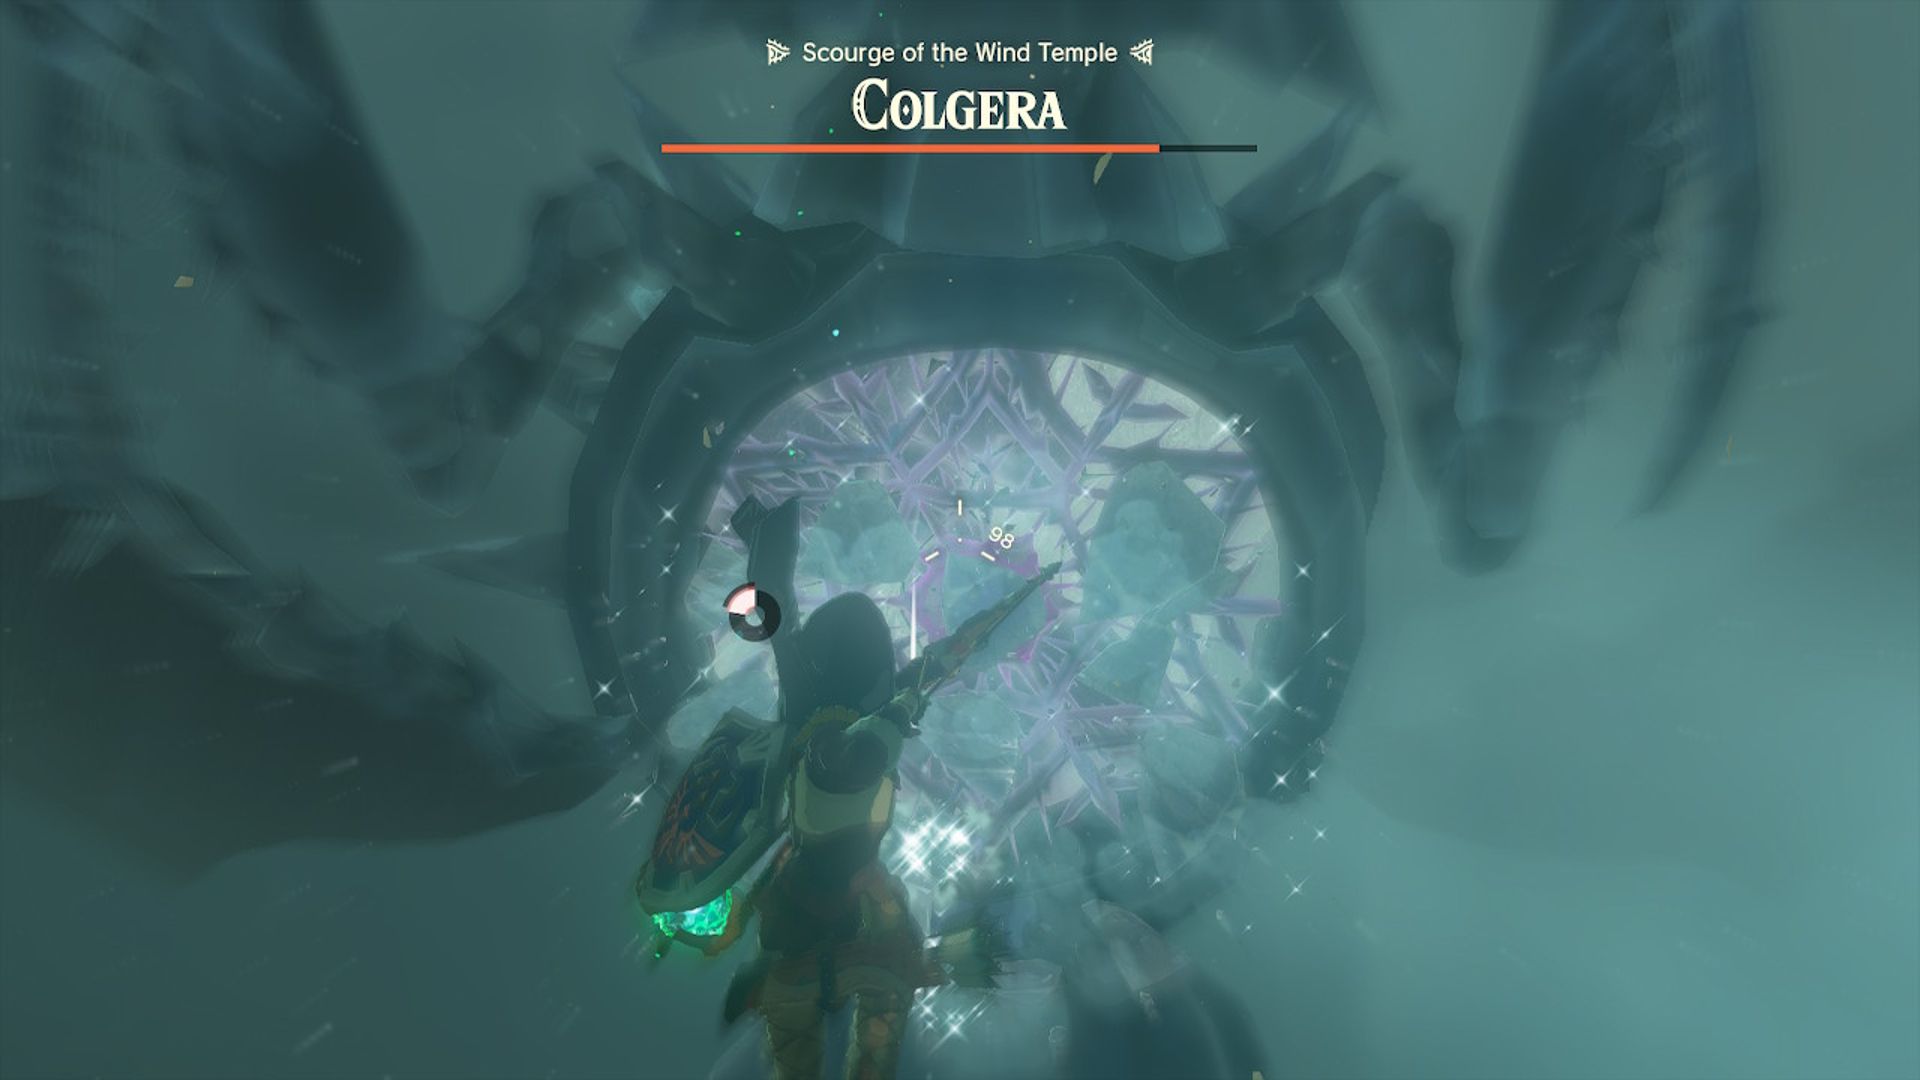 The Legend Of Zelda Tears Of The Kingdom Link Shooting And Breaking Colgera's Weak Spot With Bow And Arrow